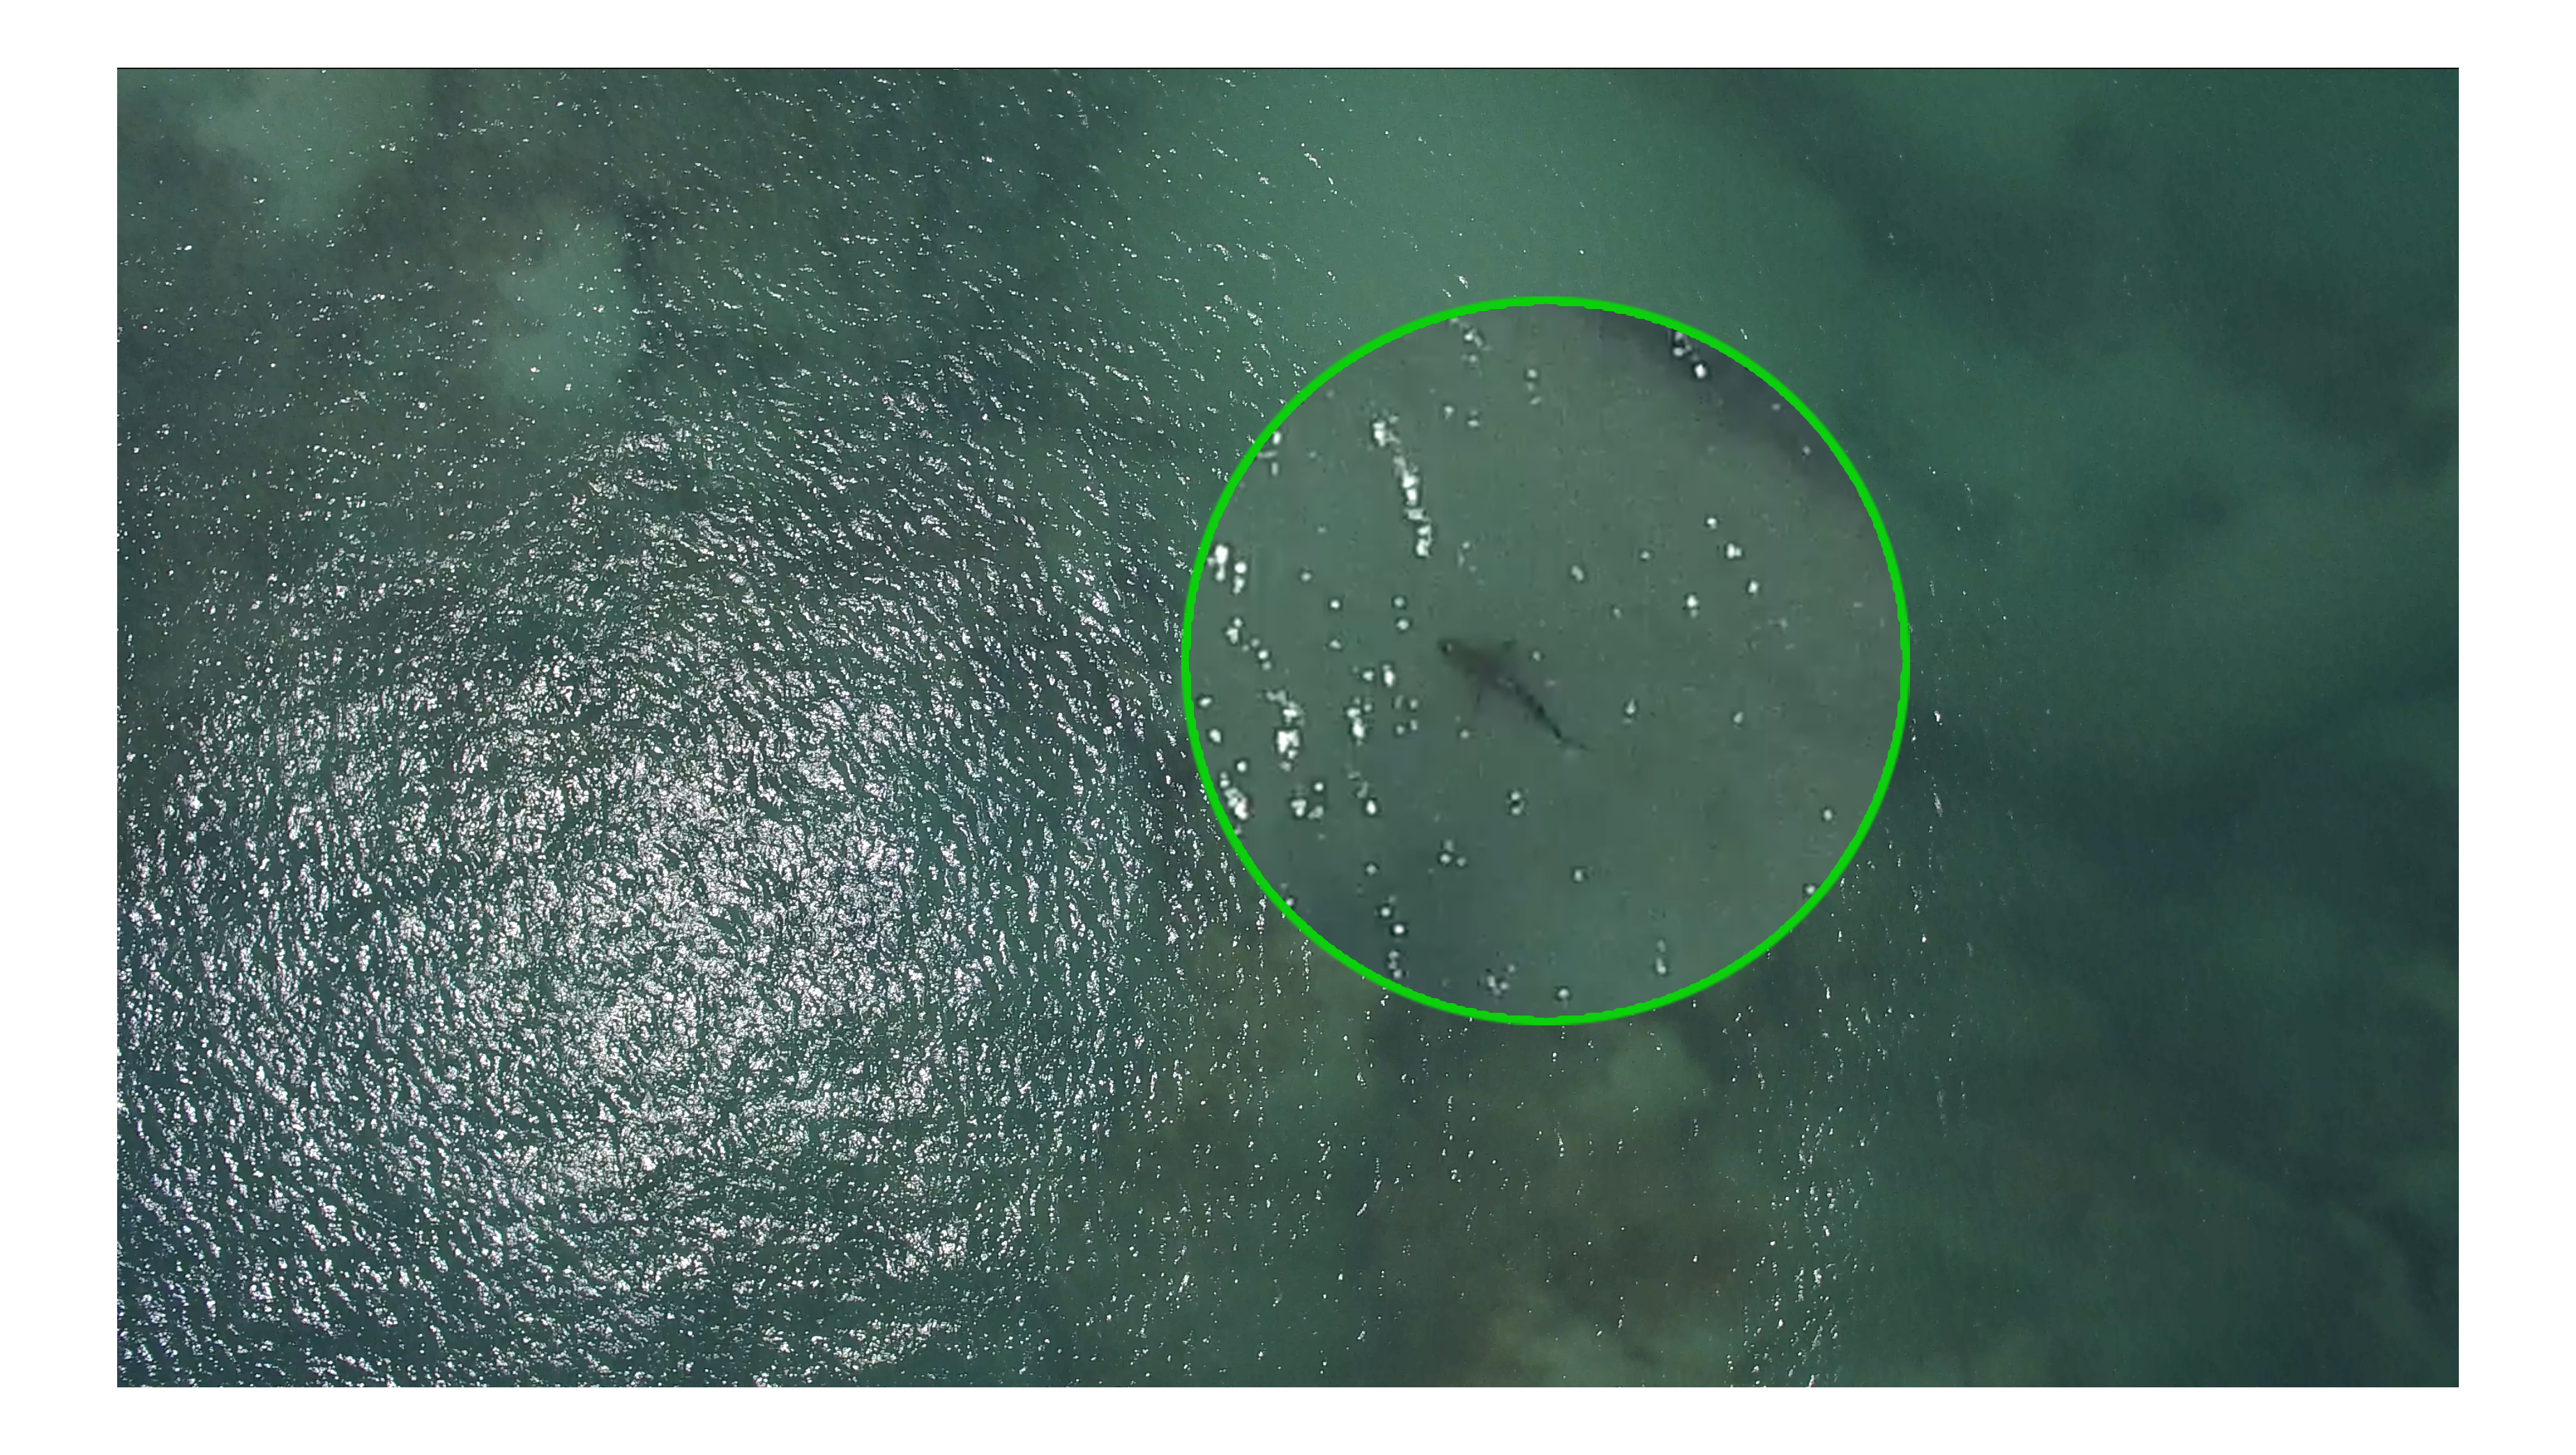 Drone fly at 60 m of altitude with a large shark.